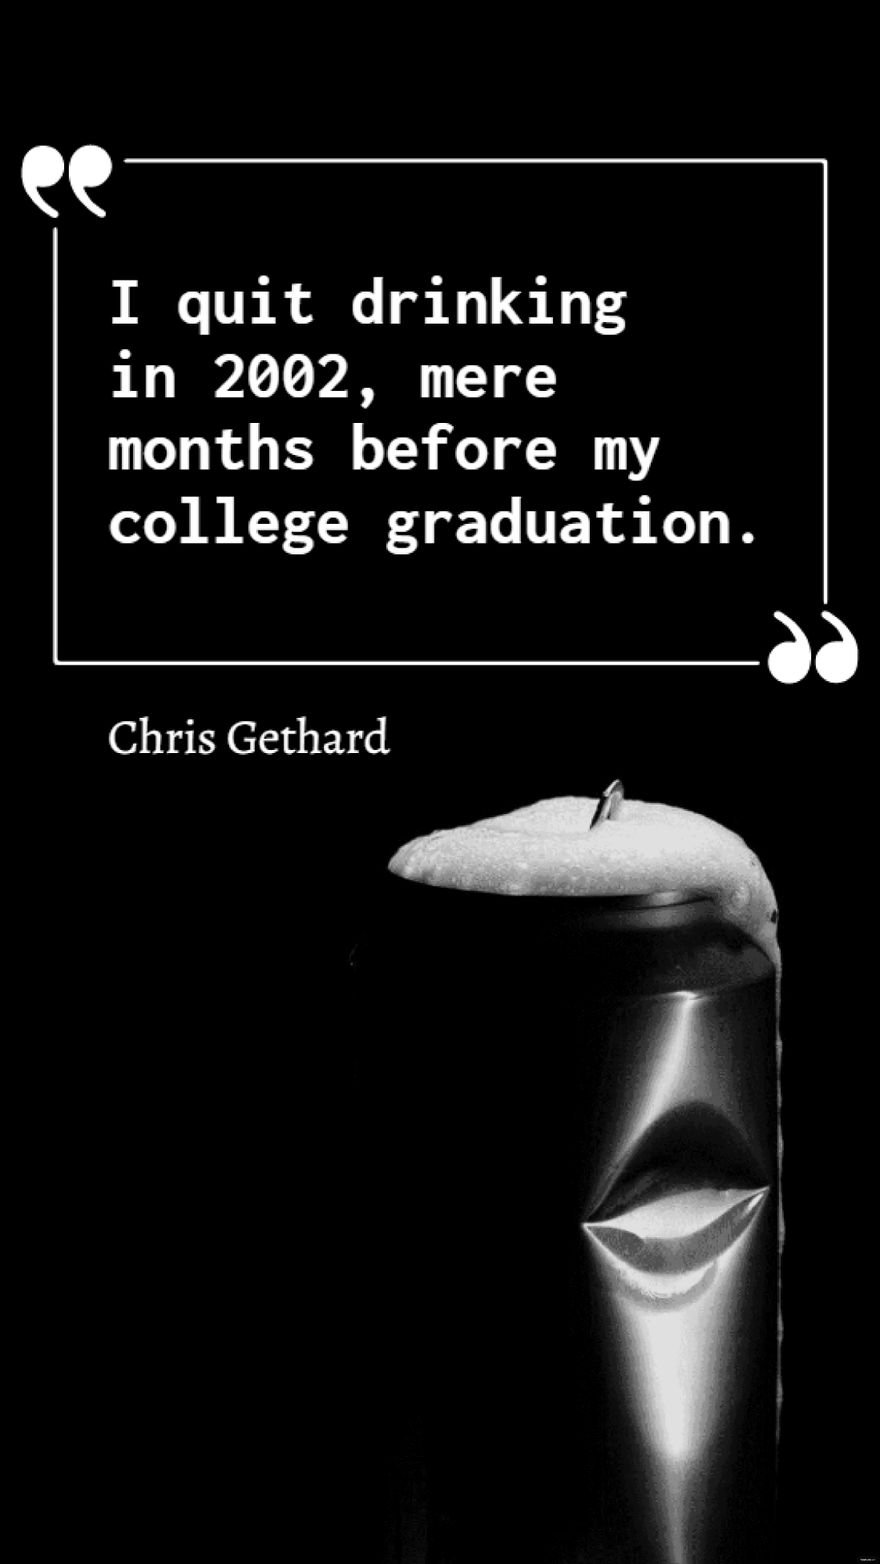 Chris Gethard - I quit drinking in 2002, mere months before my college graduation.